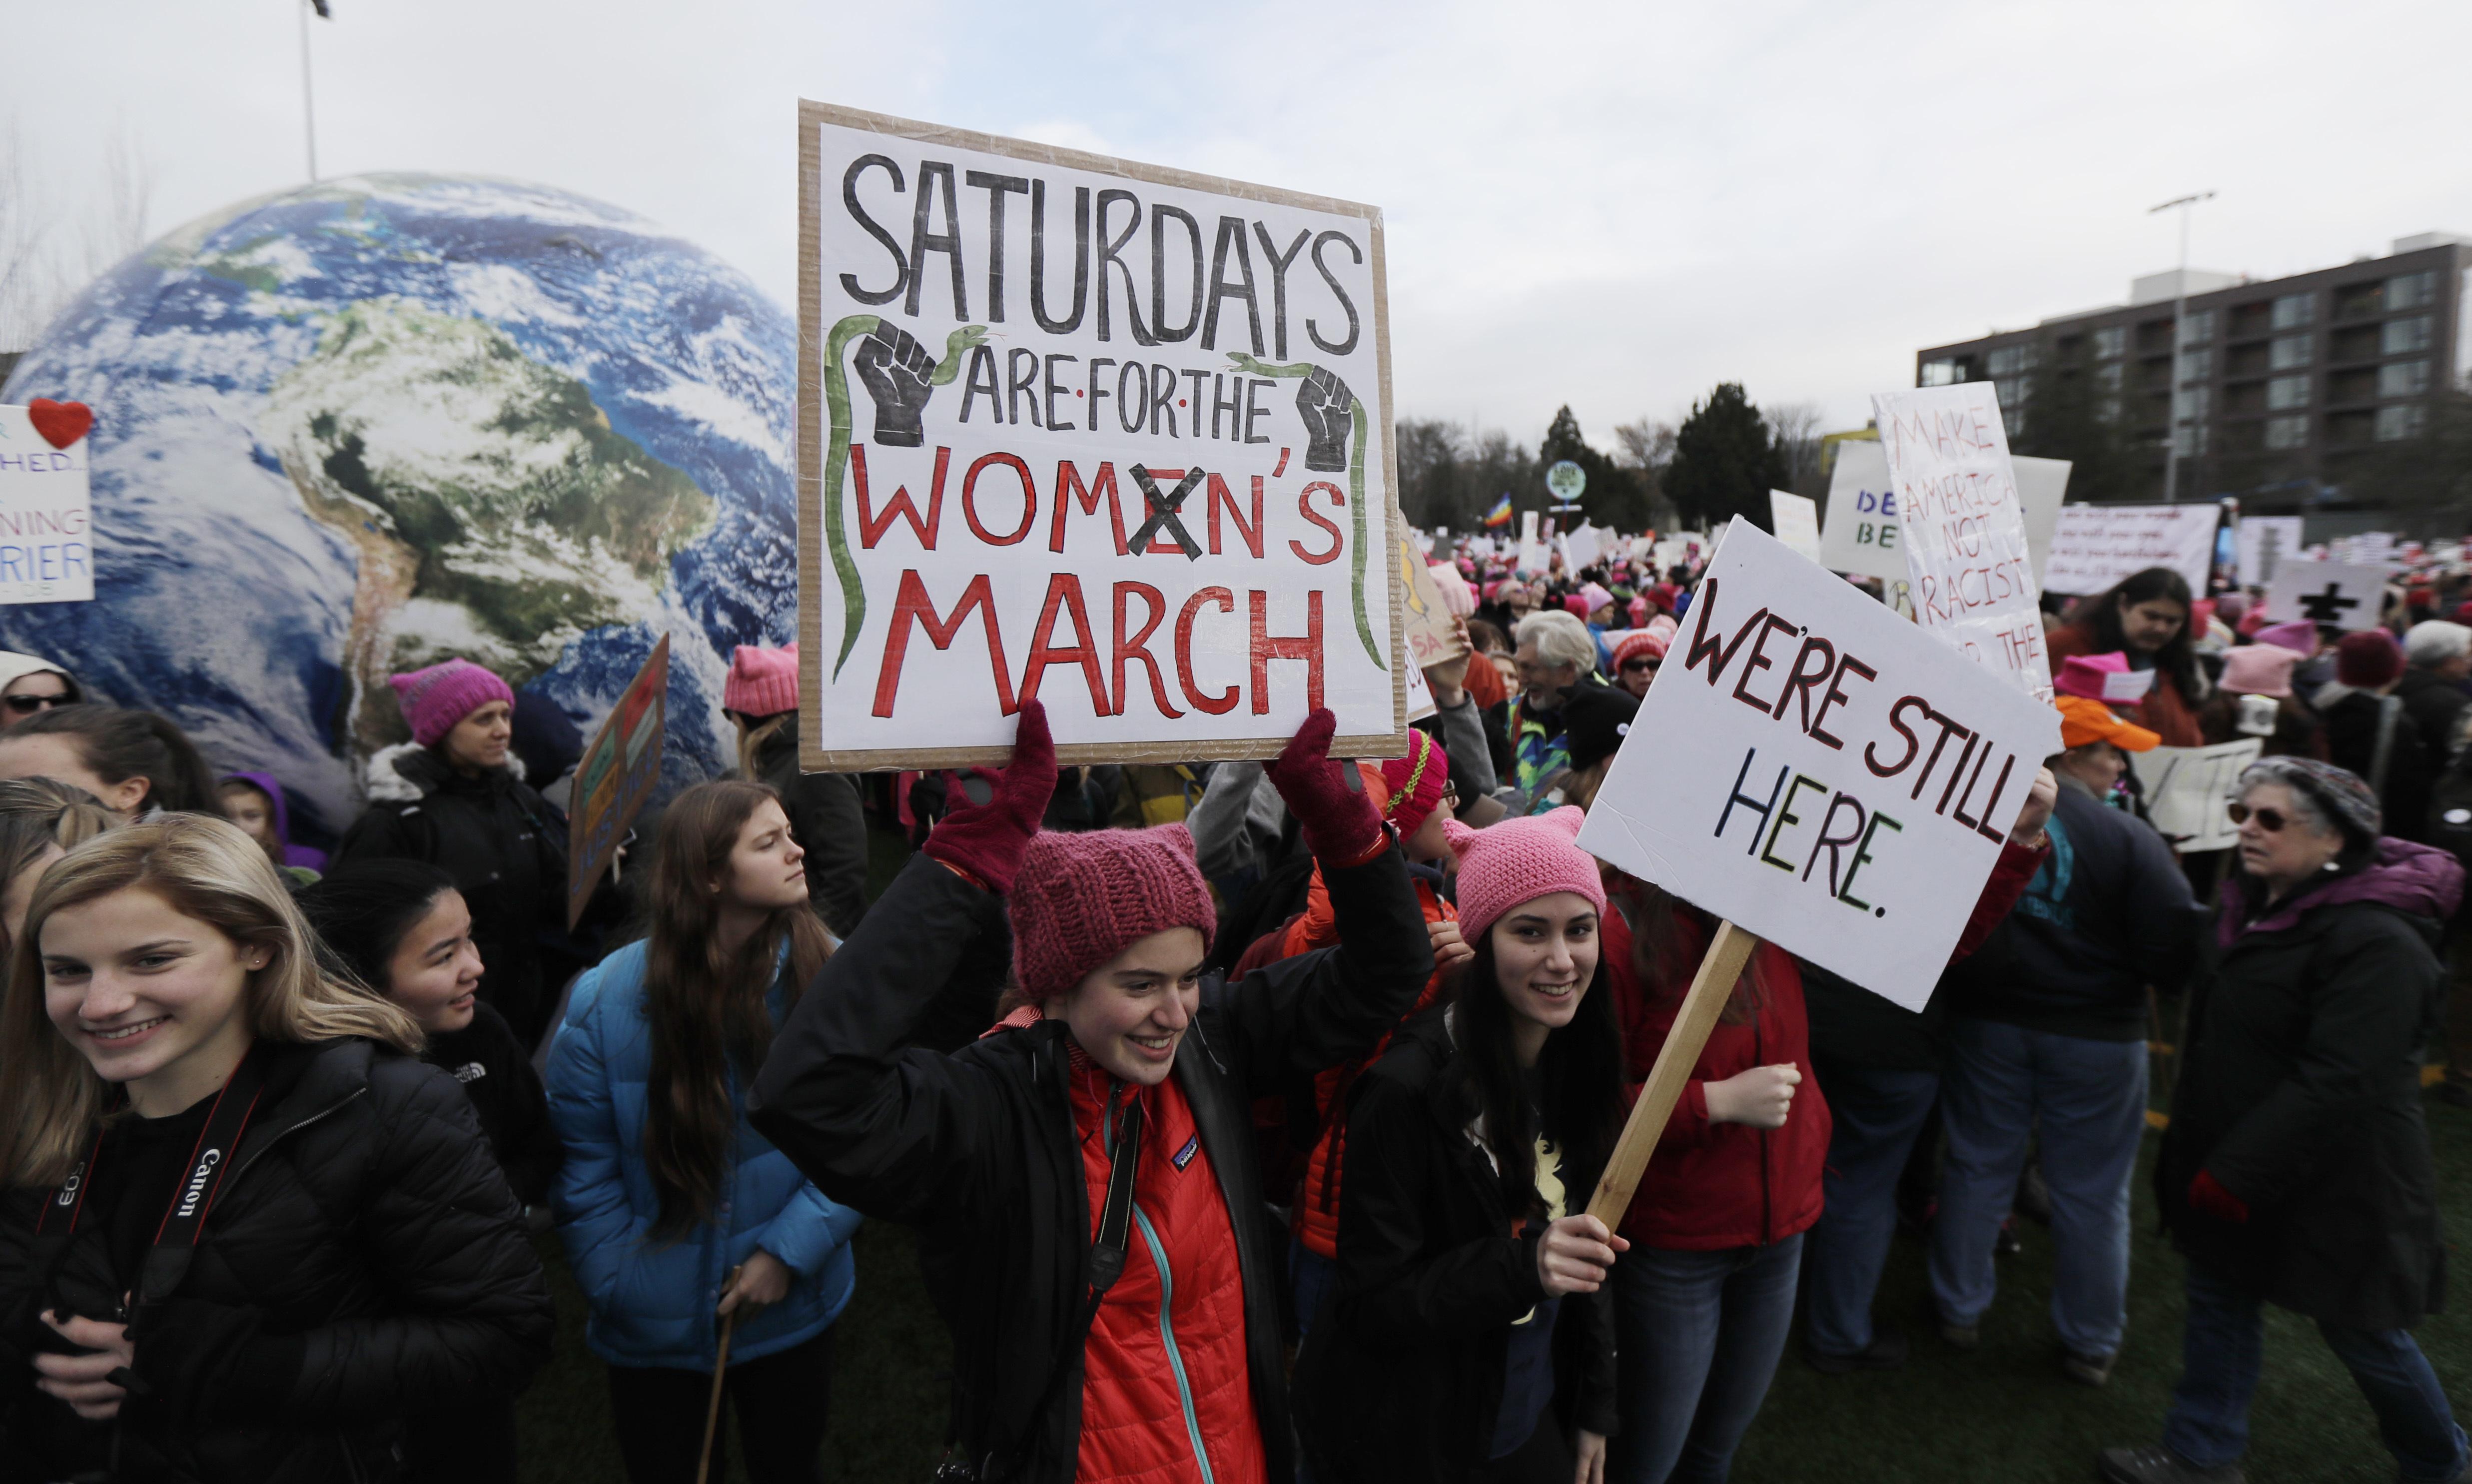 Big crowd turns out for Seattle women’s march, man arrested | The Spokesman-Review